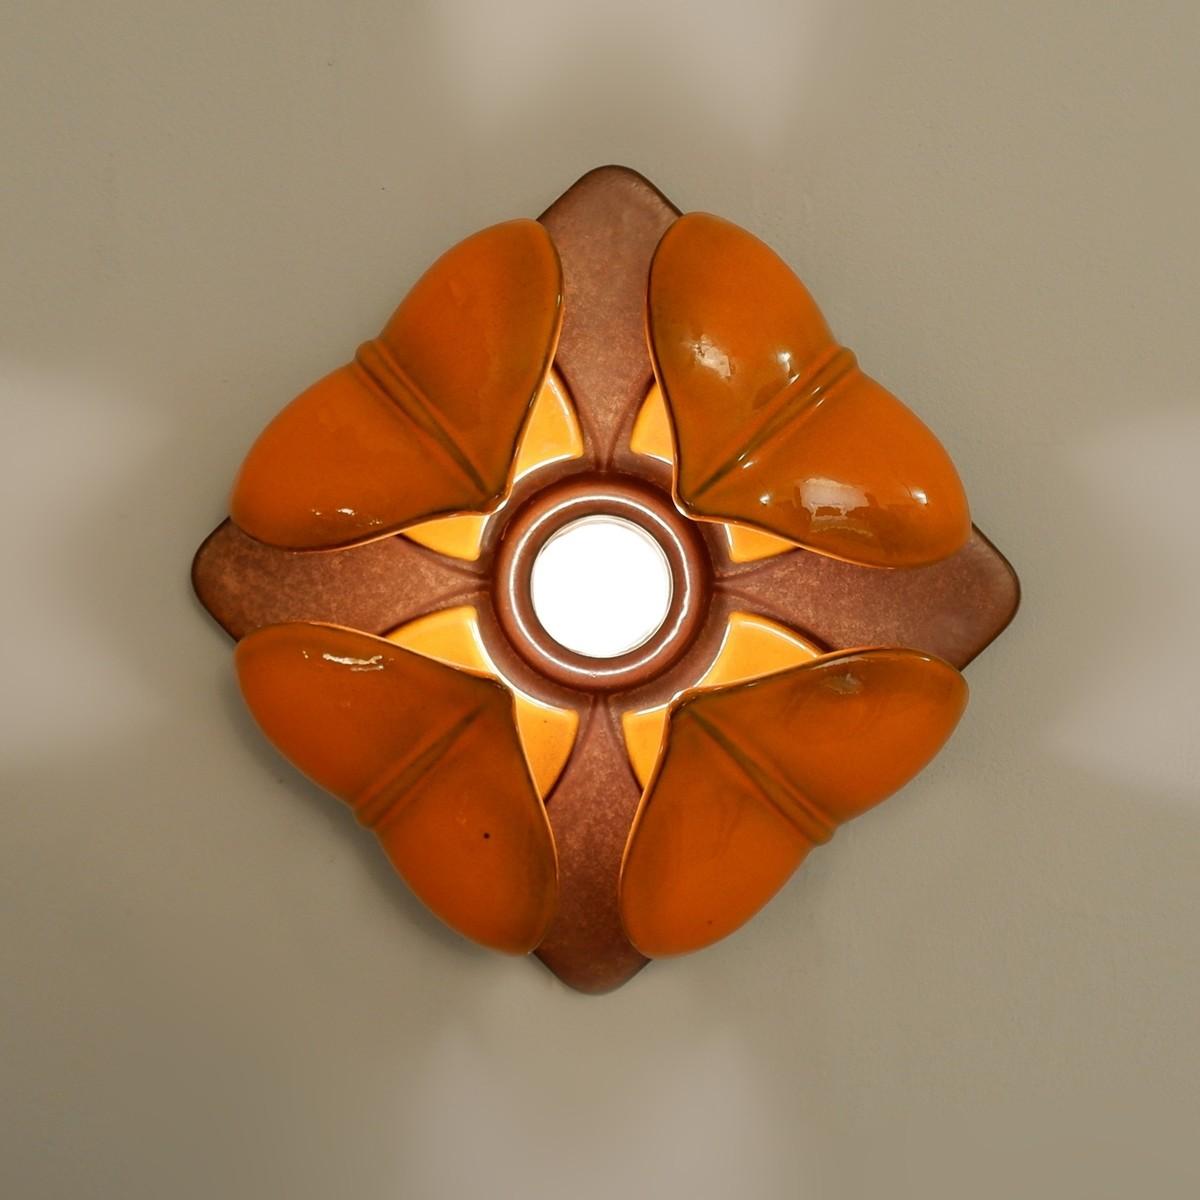 Goebel ceramic flower wall lamps, Germany, 1960s, 8 available
Sold par pair
4 pairs available.